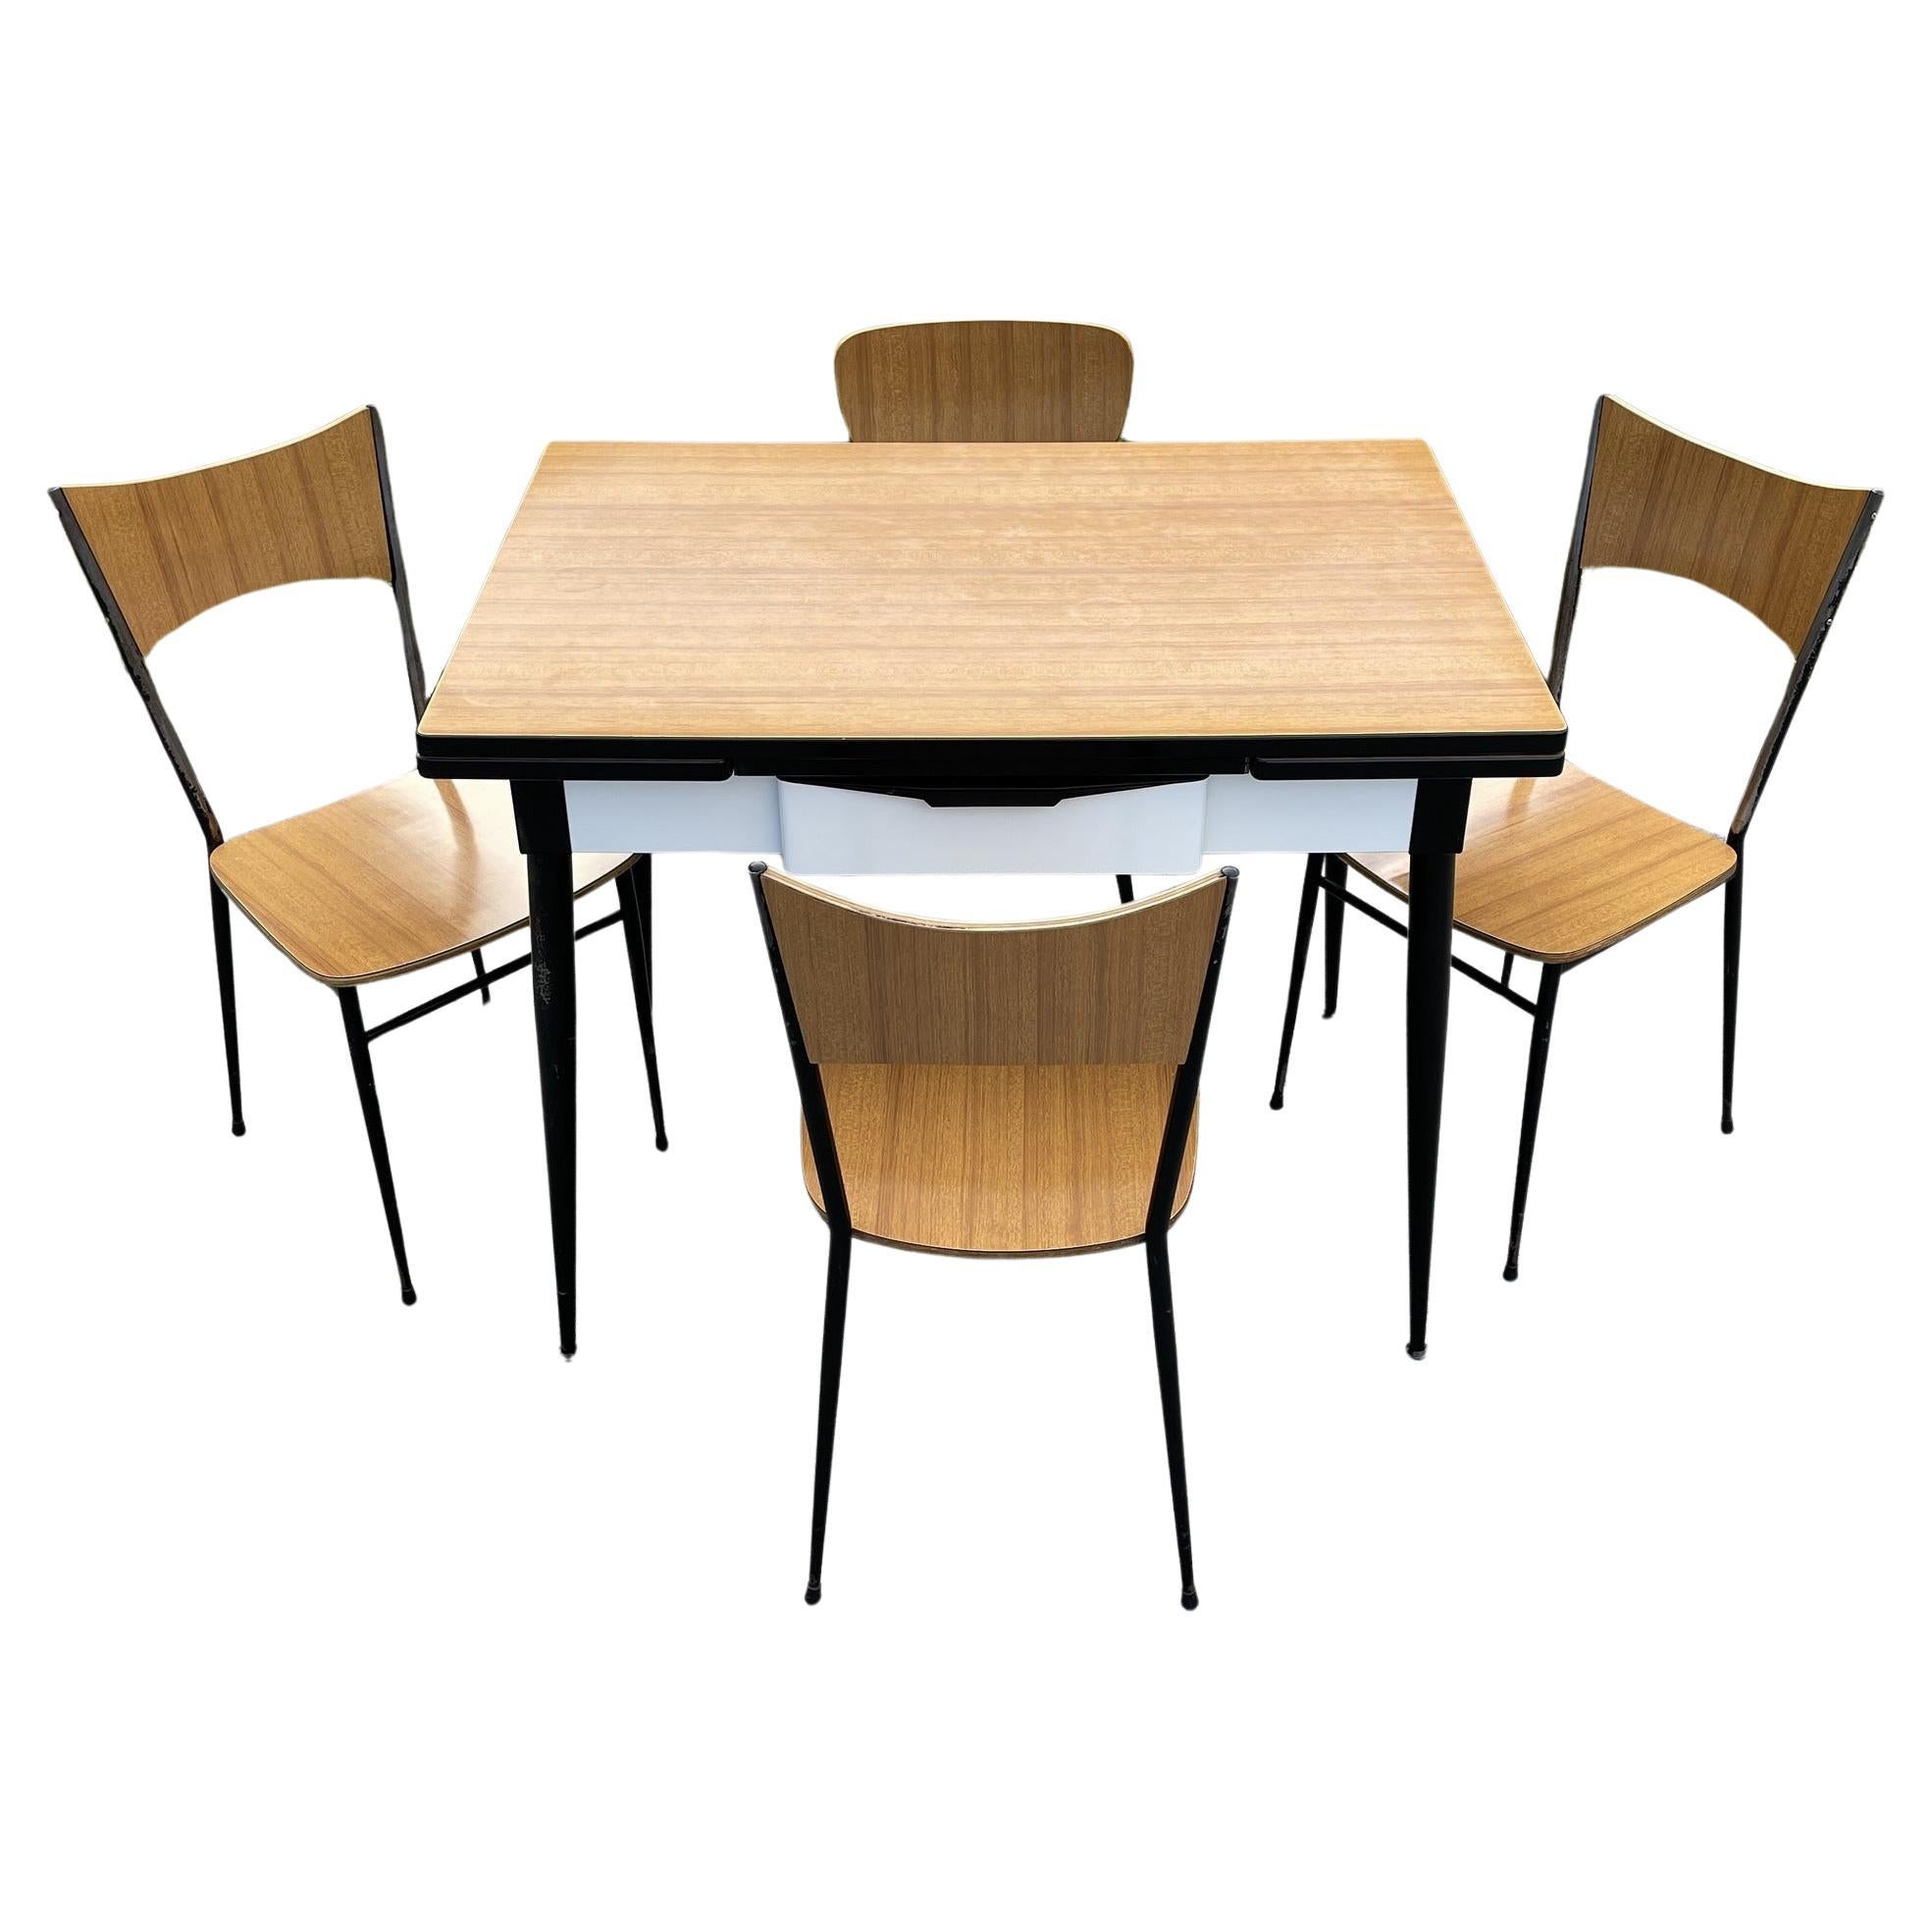 Mid-century dining table and 4 chairs by Salvarani Depositato Italy 1950s  For Sale